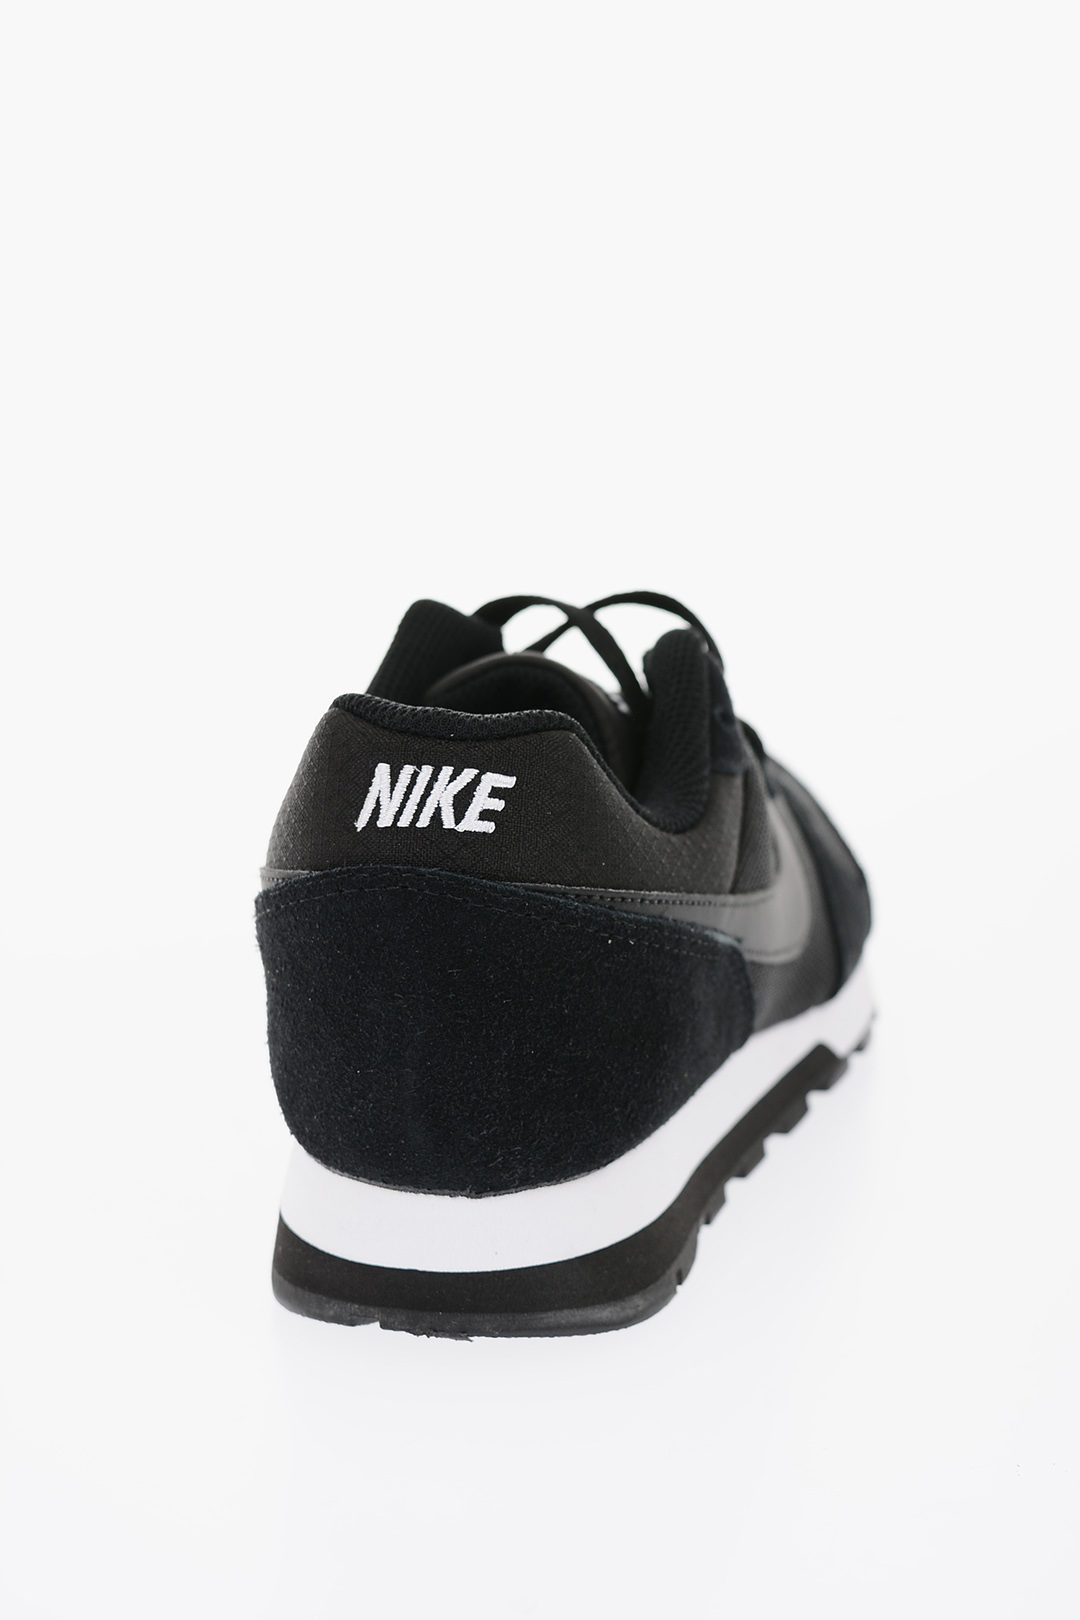 Nike Fabric NIKE MD 2 Sneakers women - Glamood Outlet